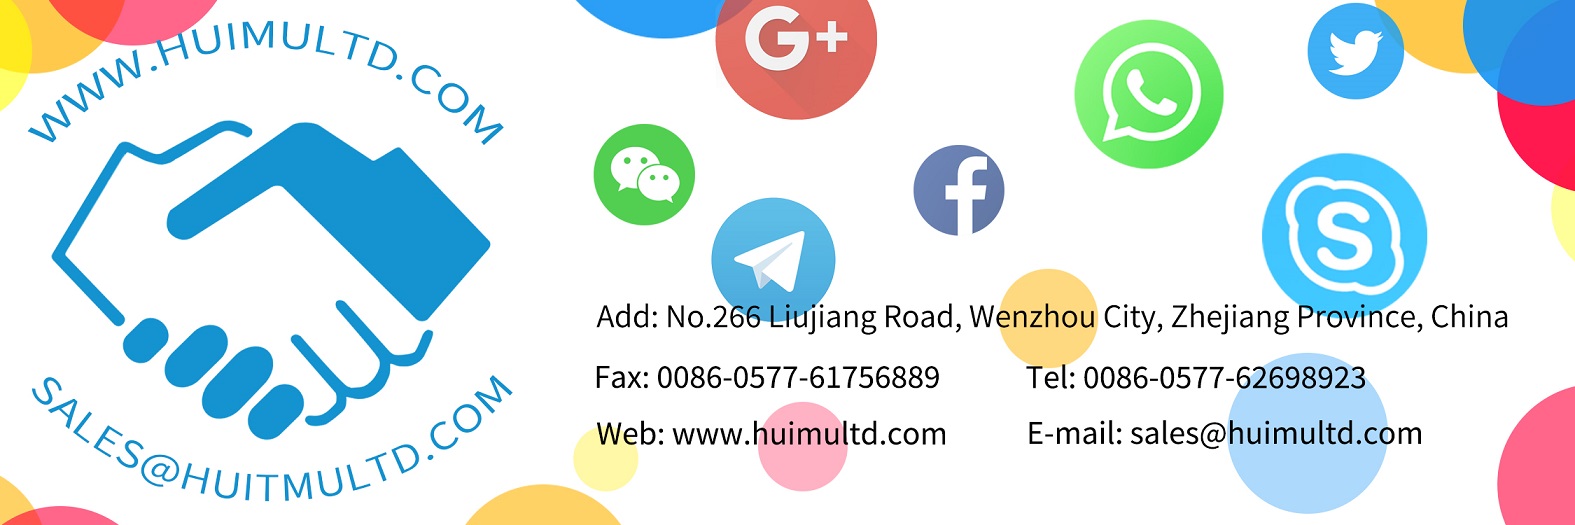 HUIMU Industrial specializes in providing industrial control products (such as Solid State Relays) and solutions, and consists of two companies: HUIMU Trade and MGR. ADD: No.266 Liujiang Road, Wenzhou, Zhejiang, China, E-mail: sales@huimultd.com, WEB: electronics.huimultd.com, TEL: 0086-‭0577-62698923,‬ FAX:0086-0577-61756889